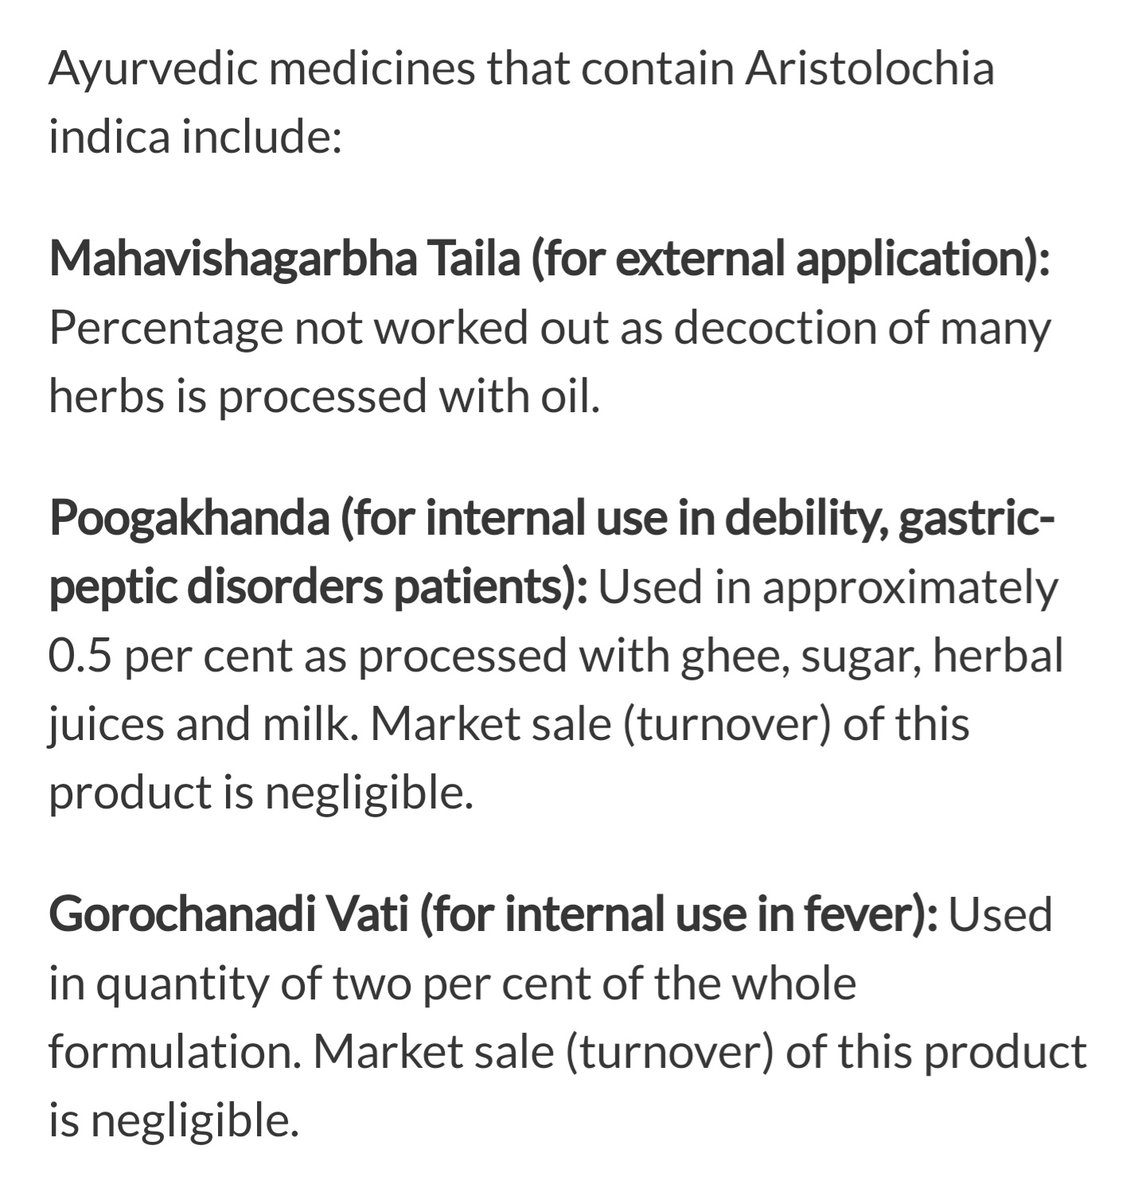 A worldwide problem, its use is banned in several countries, but not in India. In Ayurveda it can be found in several formulations used in asthma, arthritis, skin disease, gastric issues, you name it. These are just a few..